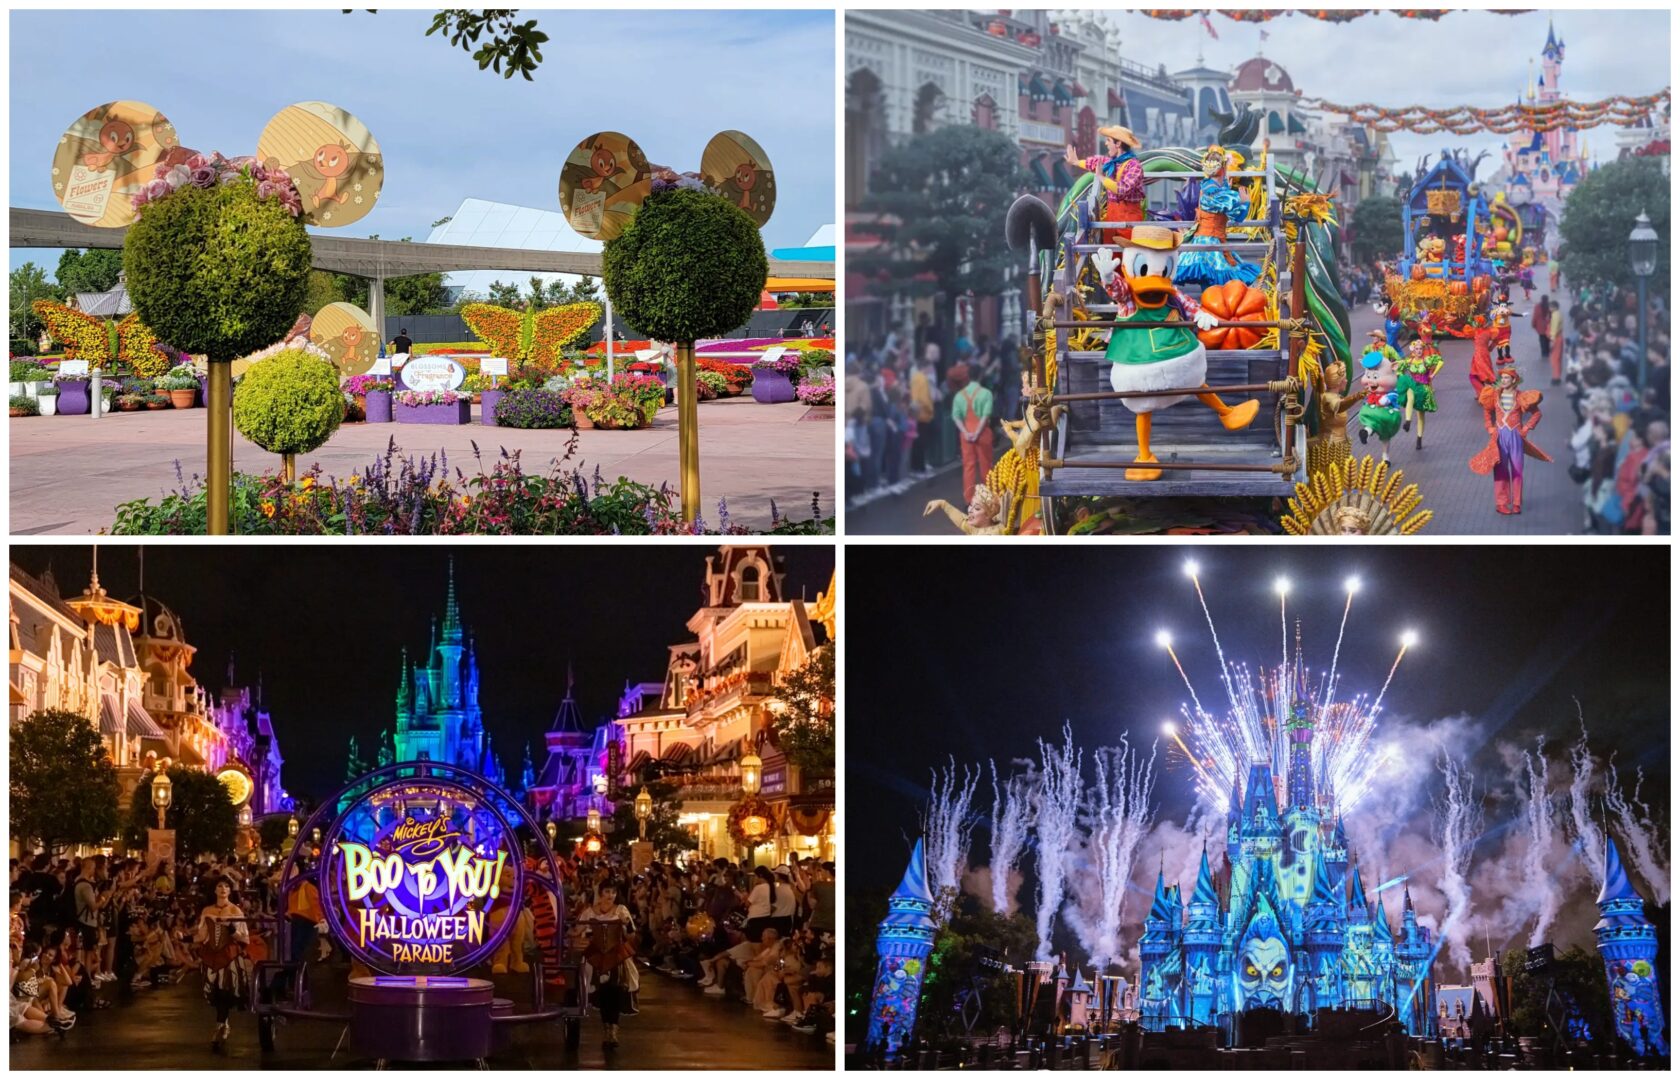 Disney News Highlights: Mickey’s Not-So-Scary Dates and Prices, Disney Vacation Club Takes Over Fort Wilderness Cabins, New Halloween Merch Sneak Peak, Halloween Around the Disney Parks